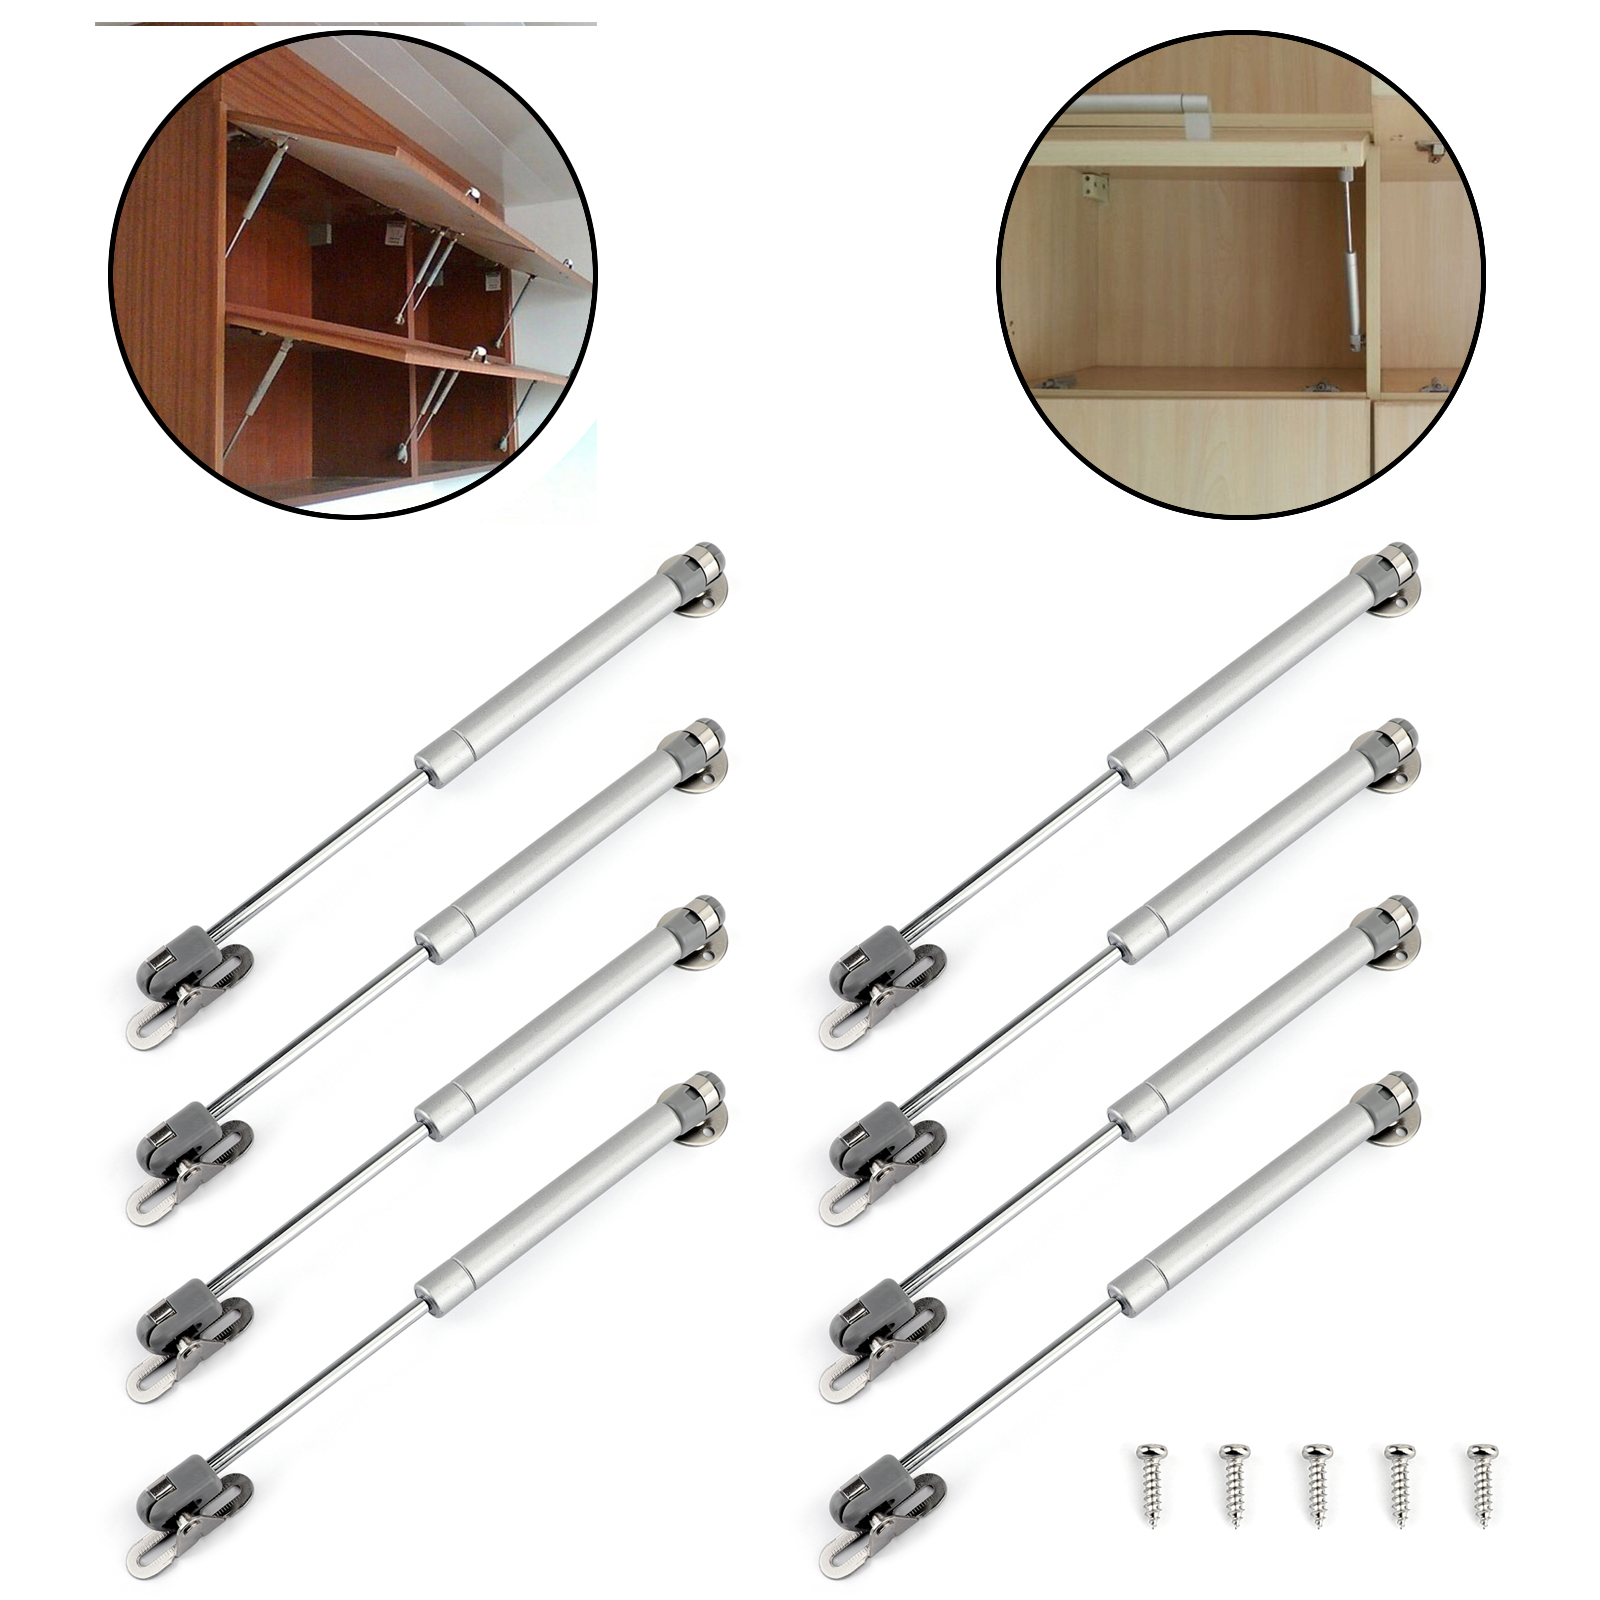 Areyourshop Wholesale 8 PACK Soft Close Kitchen Door Gas Spring Lift Hinge Strong Hydraulic Hardware Kit